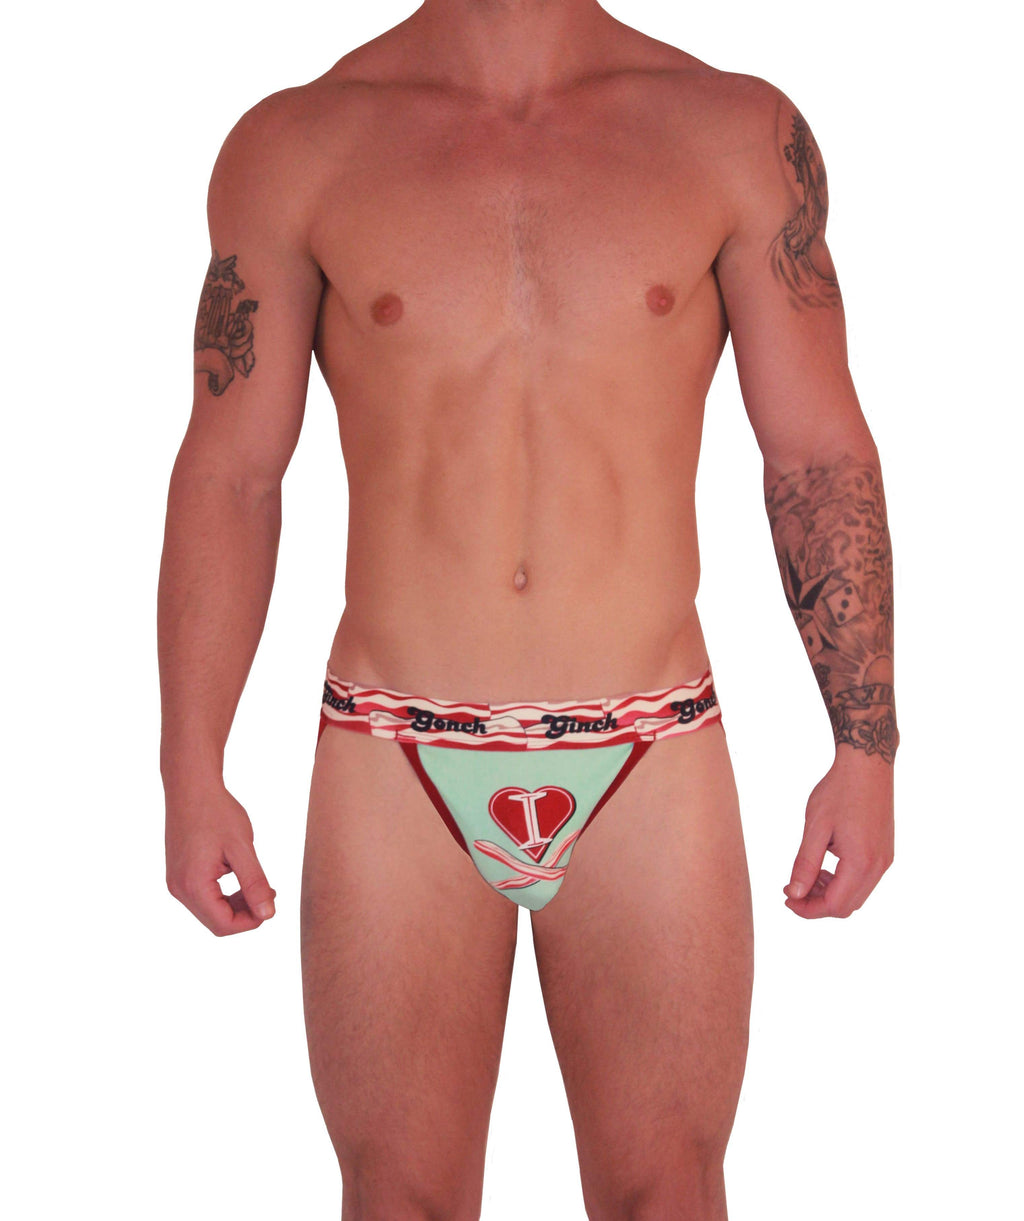 I Love Bacon Brief Ginch Gonch Men's underwear jock with white teal and red, and bacon detail and waistband front